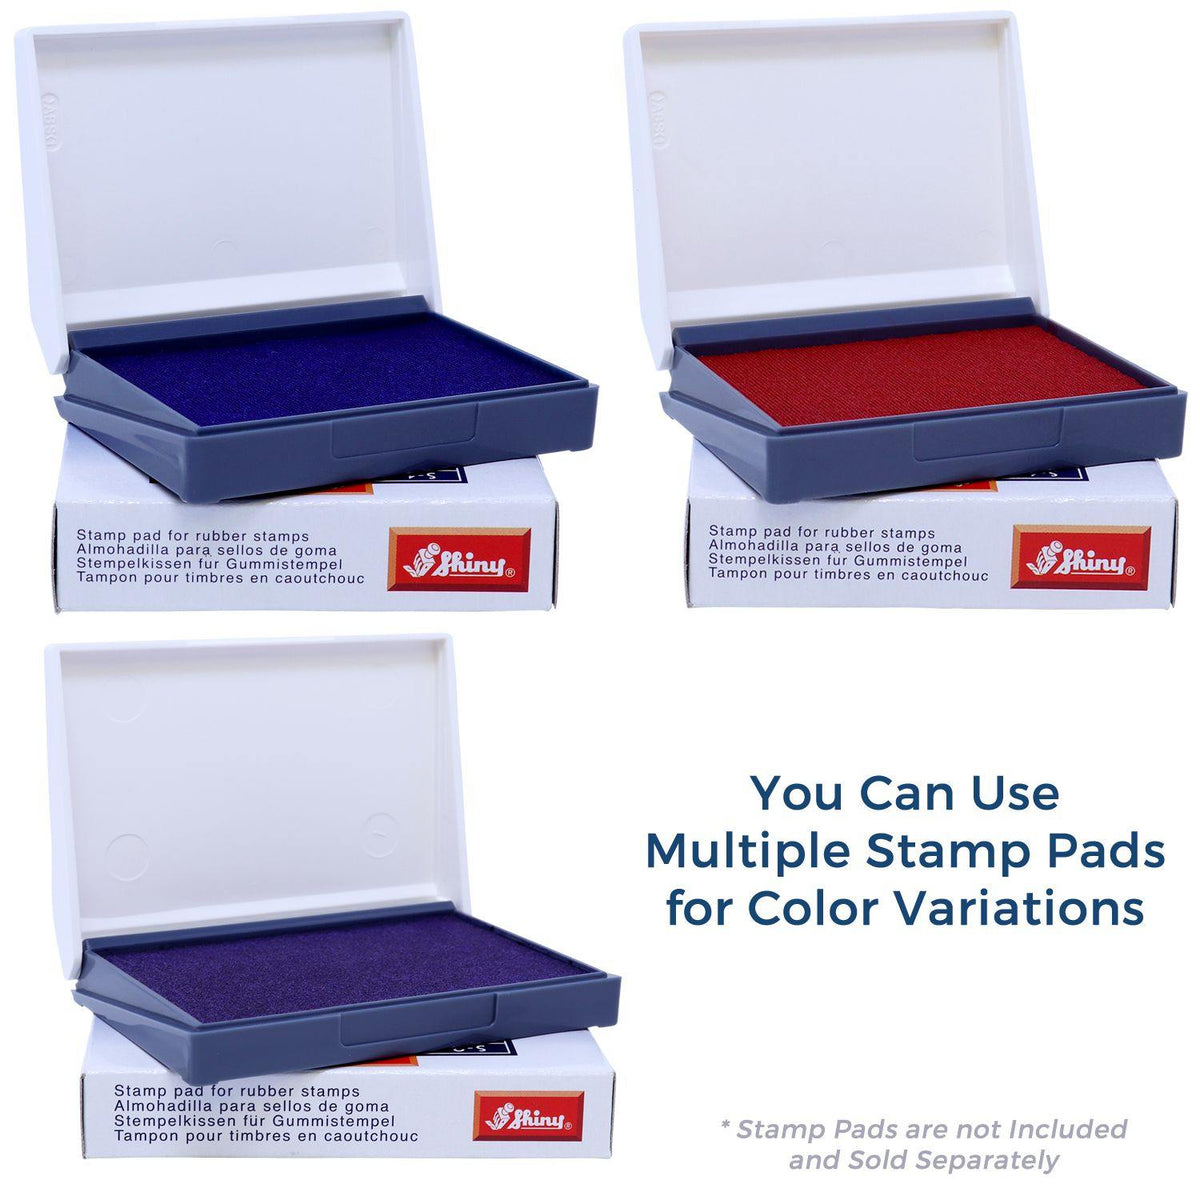 Stamp Pads for Aviso Rubber Stamp Available